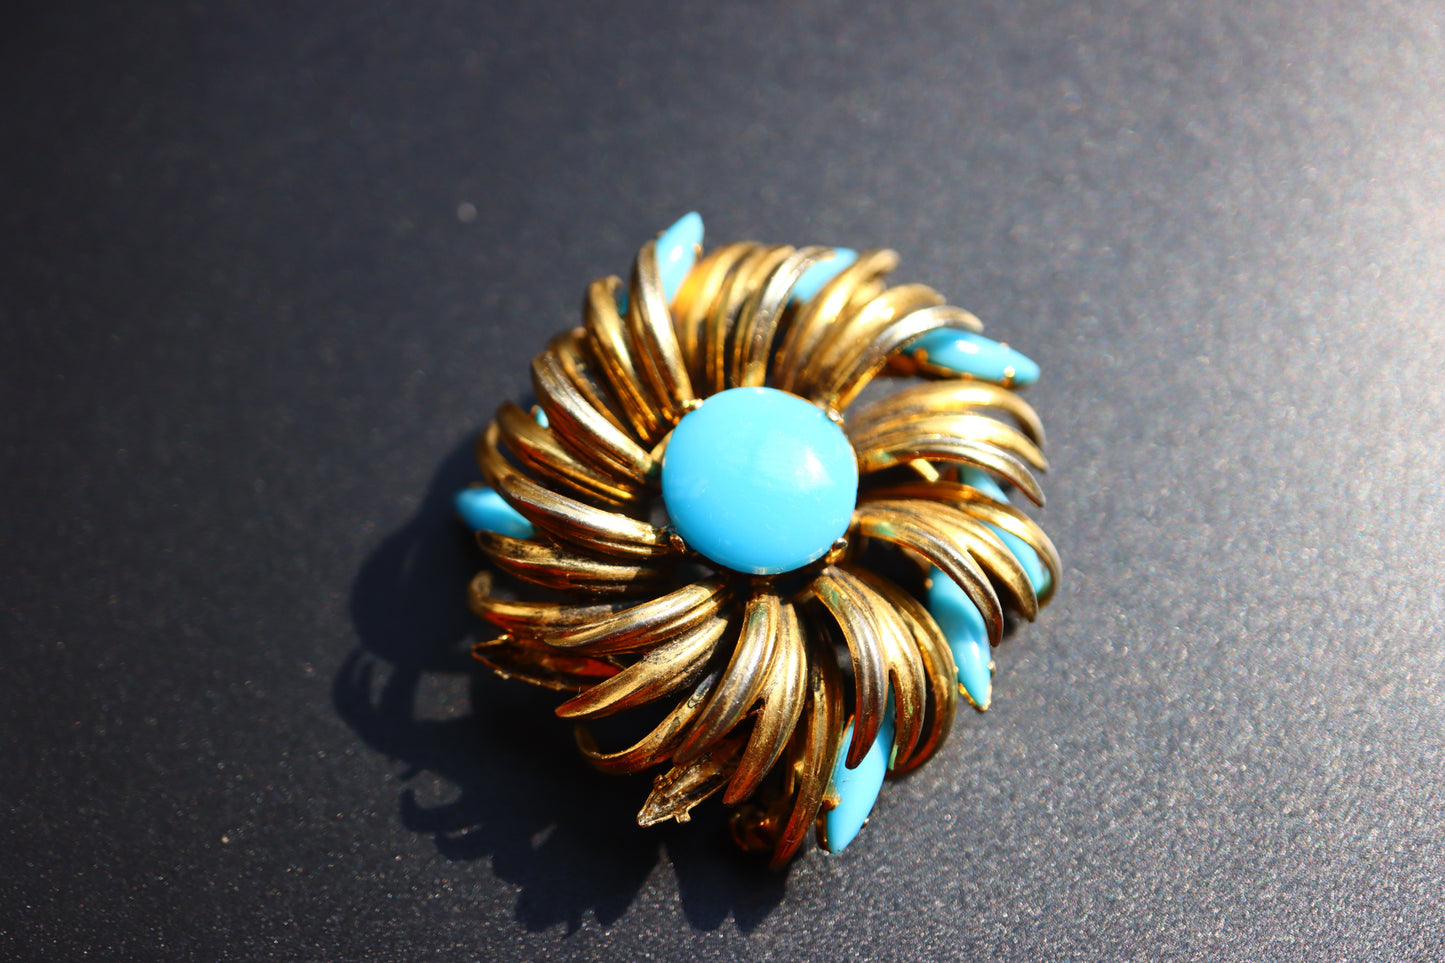 CHRISTIAN DIOR 1963 Germany gold tone turquoise cabochon flower brooch